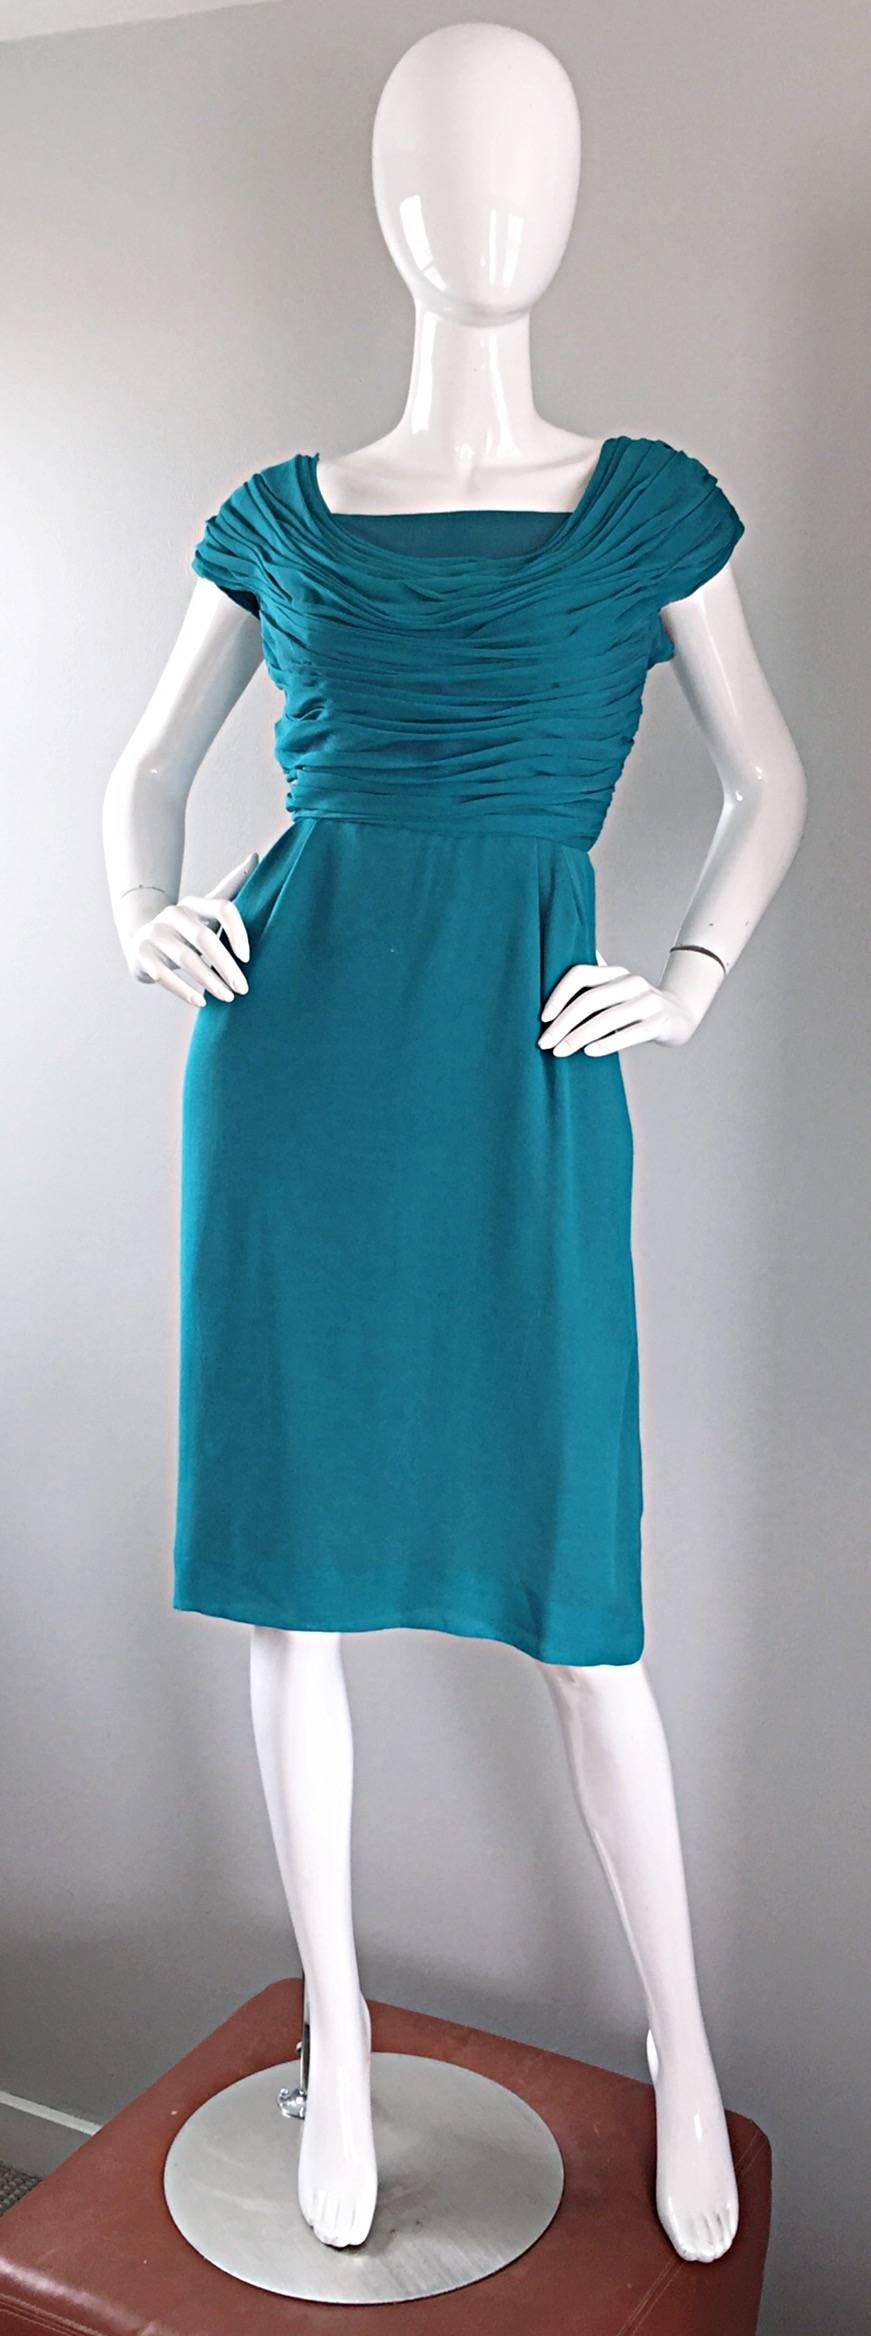 Beautiful 1950s ELLIETTE LEWIS teal blue silk chiffon dress! Pleated ruched bodice has a Grecian feel, and features cap sleeves. Flattering straight skirt. Multiple layers of soft silk chiffon. Full metal zipper with hook-and-eye closure. Vibrant